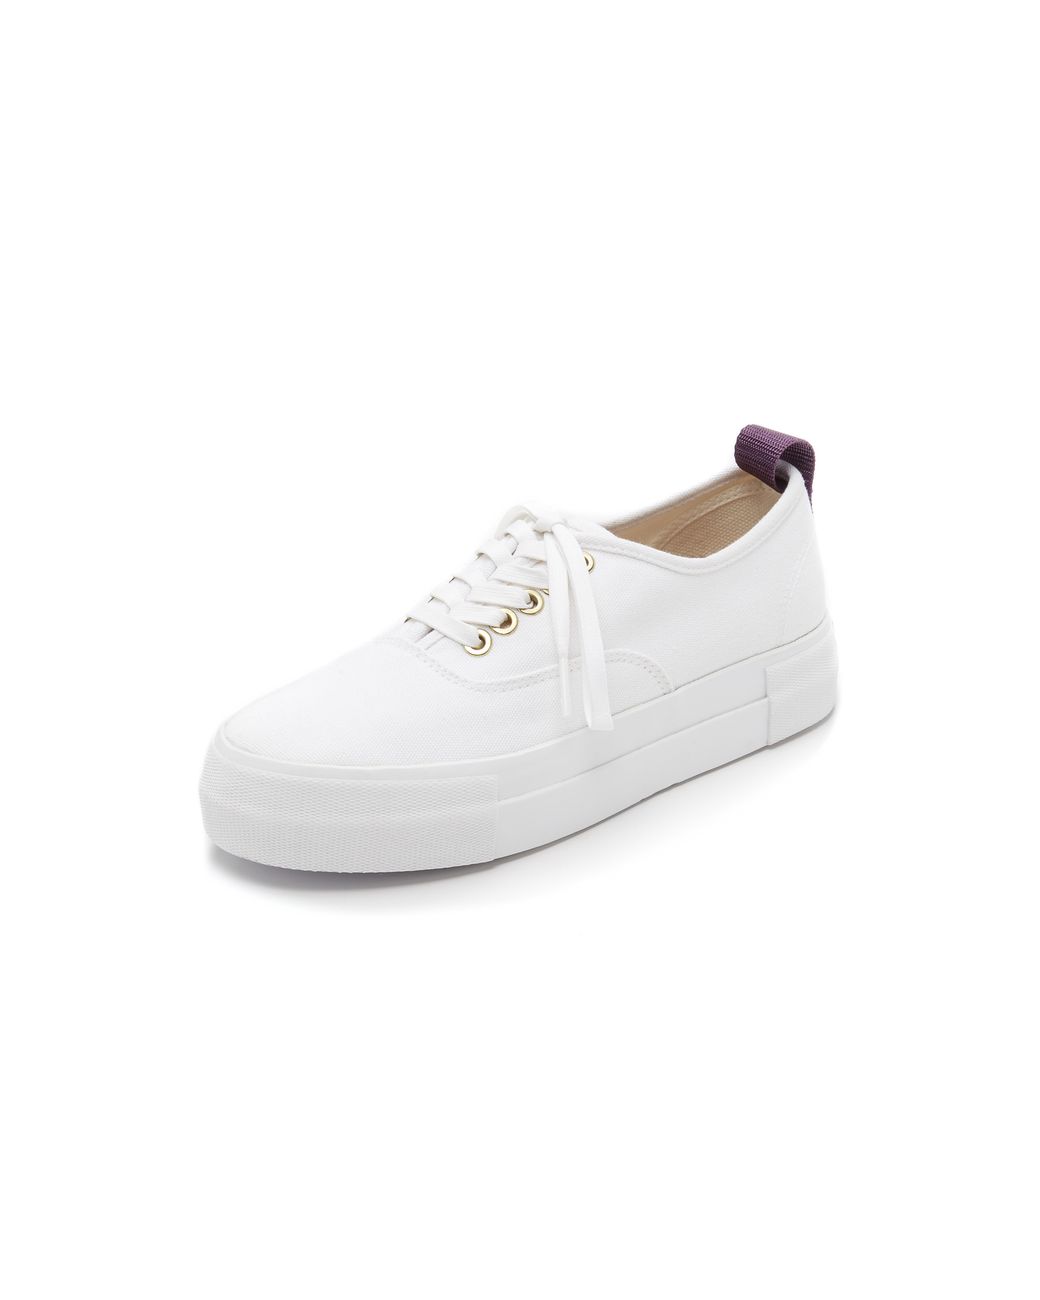 Eytys Mother Canvas Sneakers in White | Lyst